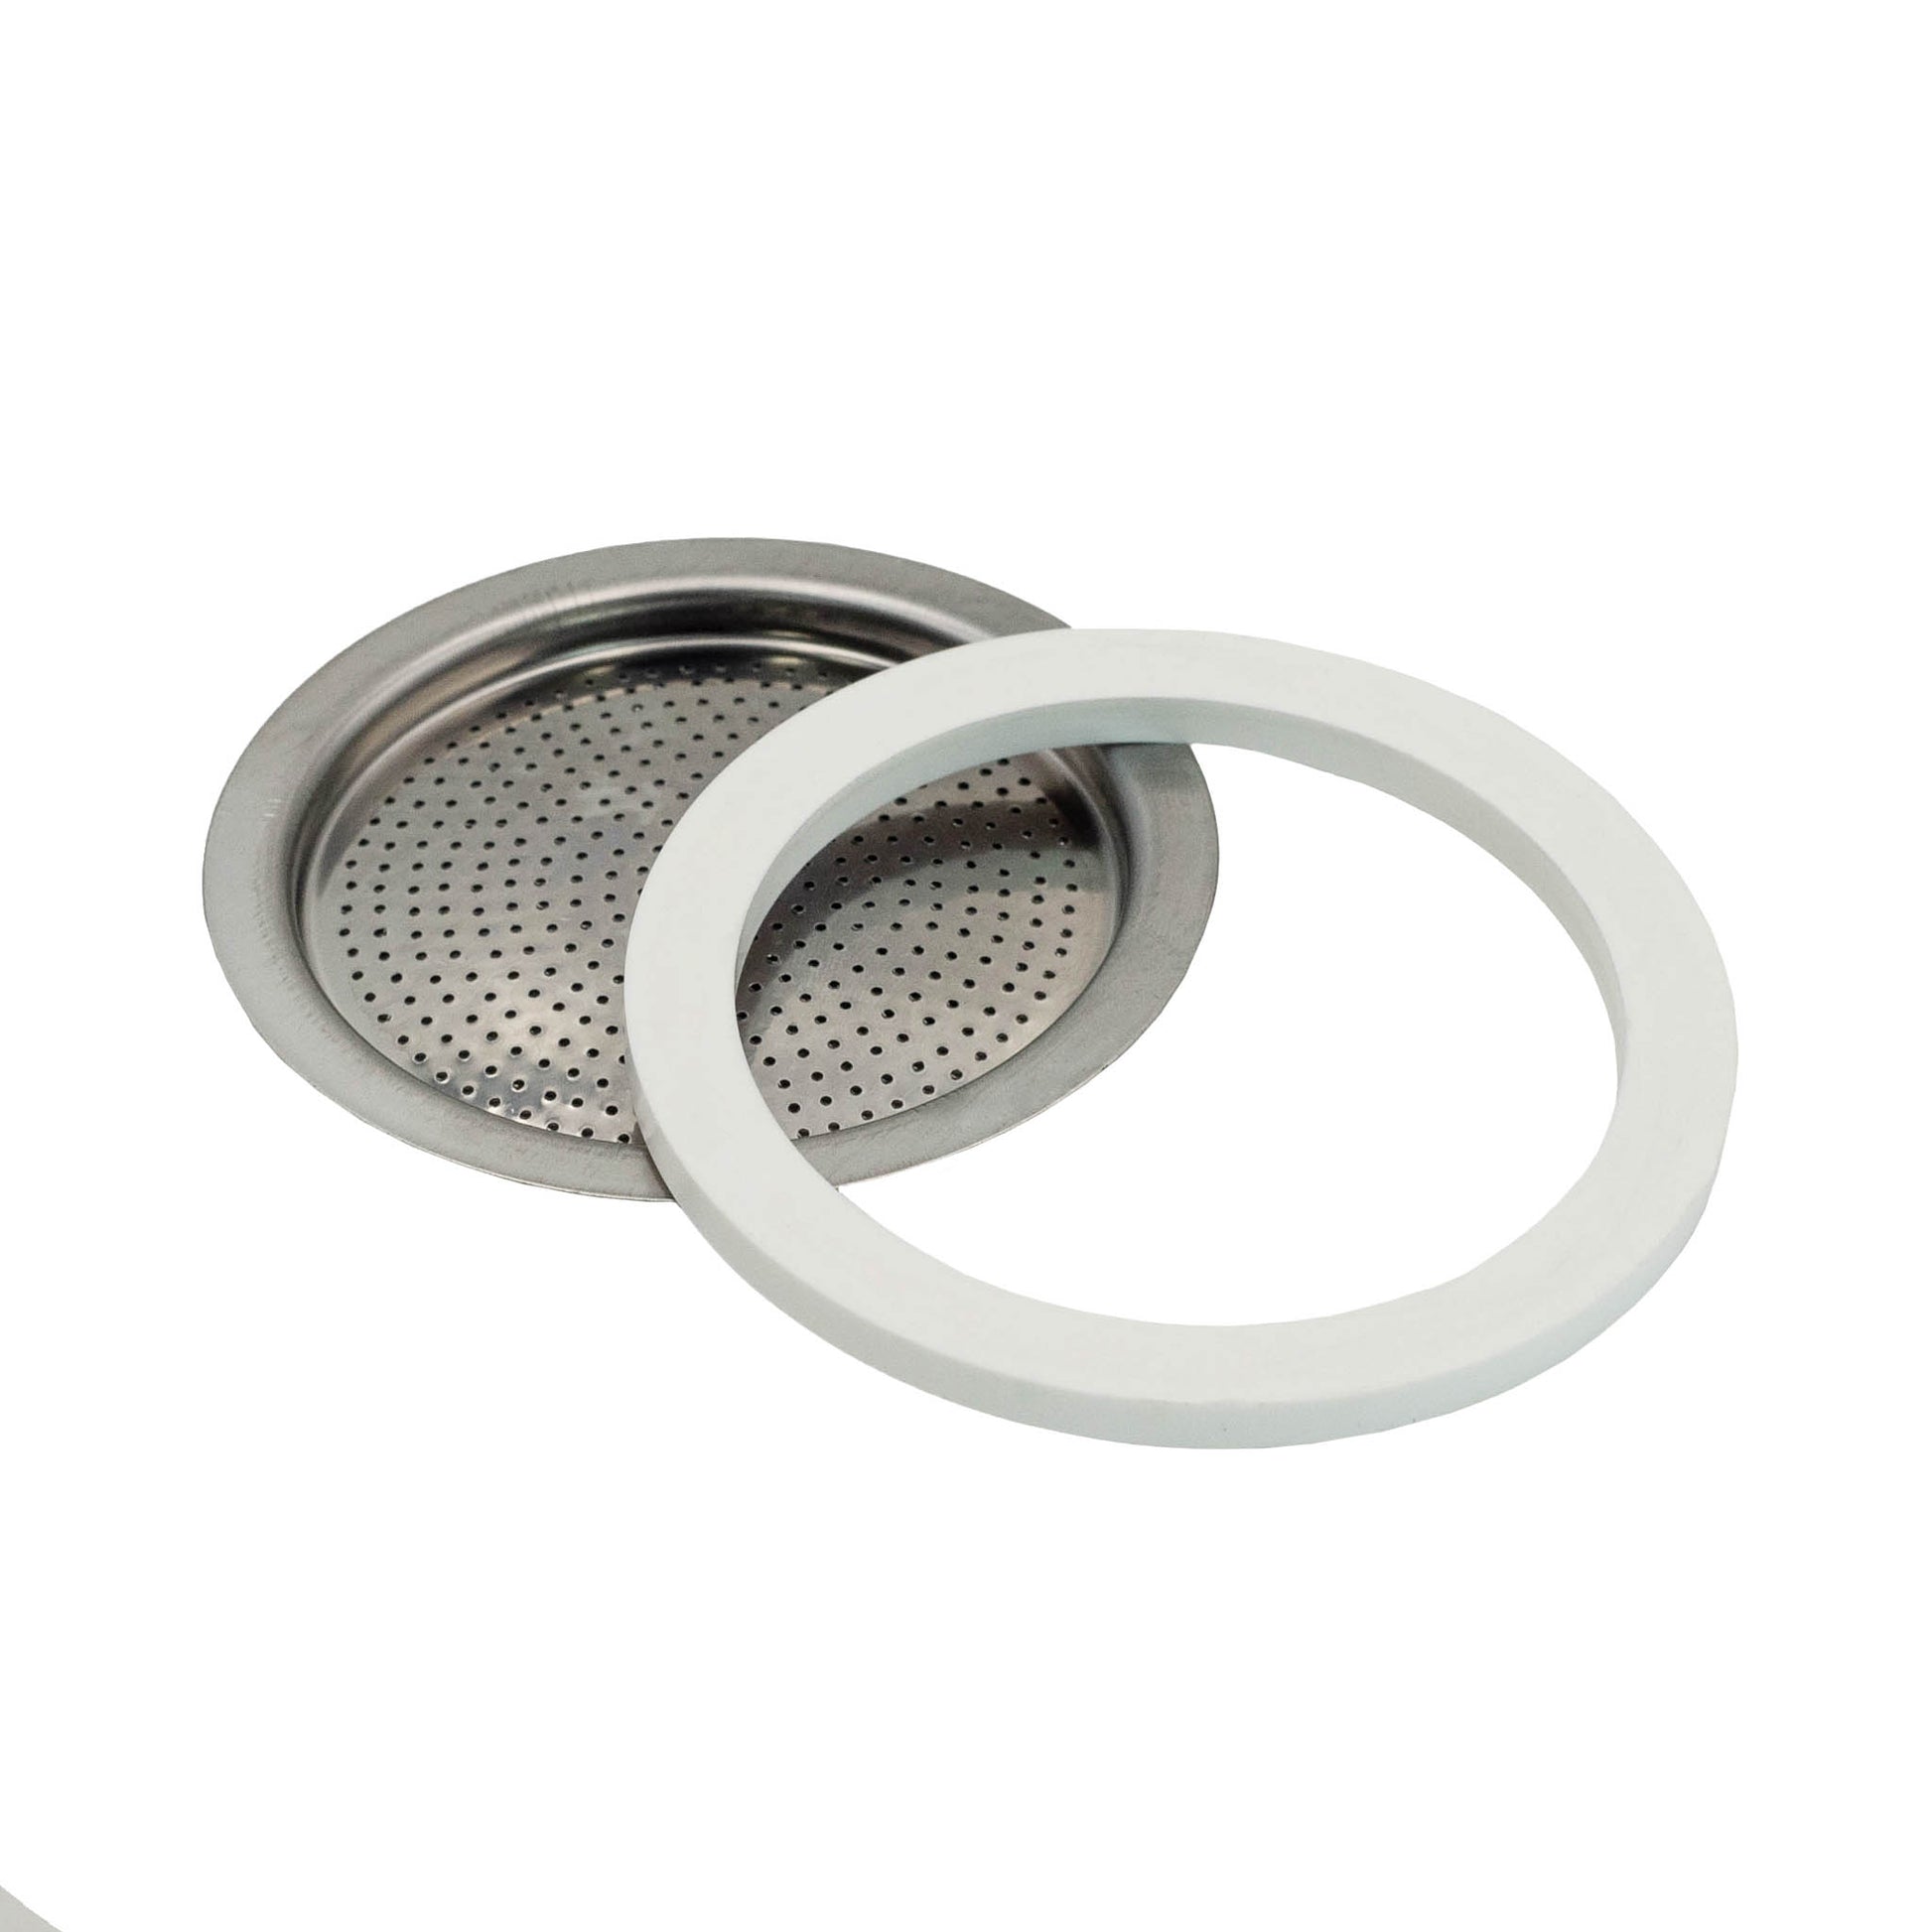 Bialetti Musa Blister Seal & Filter replacement rubber gasket with filter plate for Bialetti Musa 4 cup